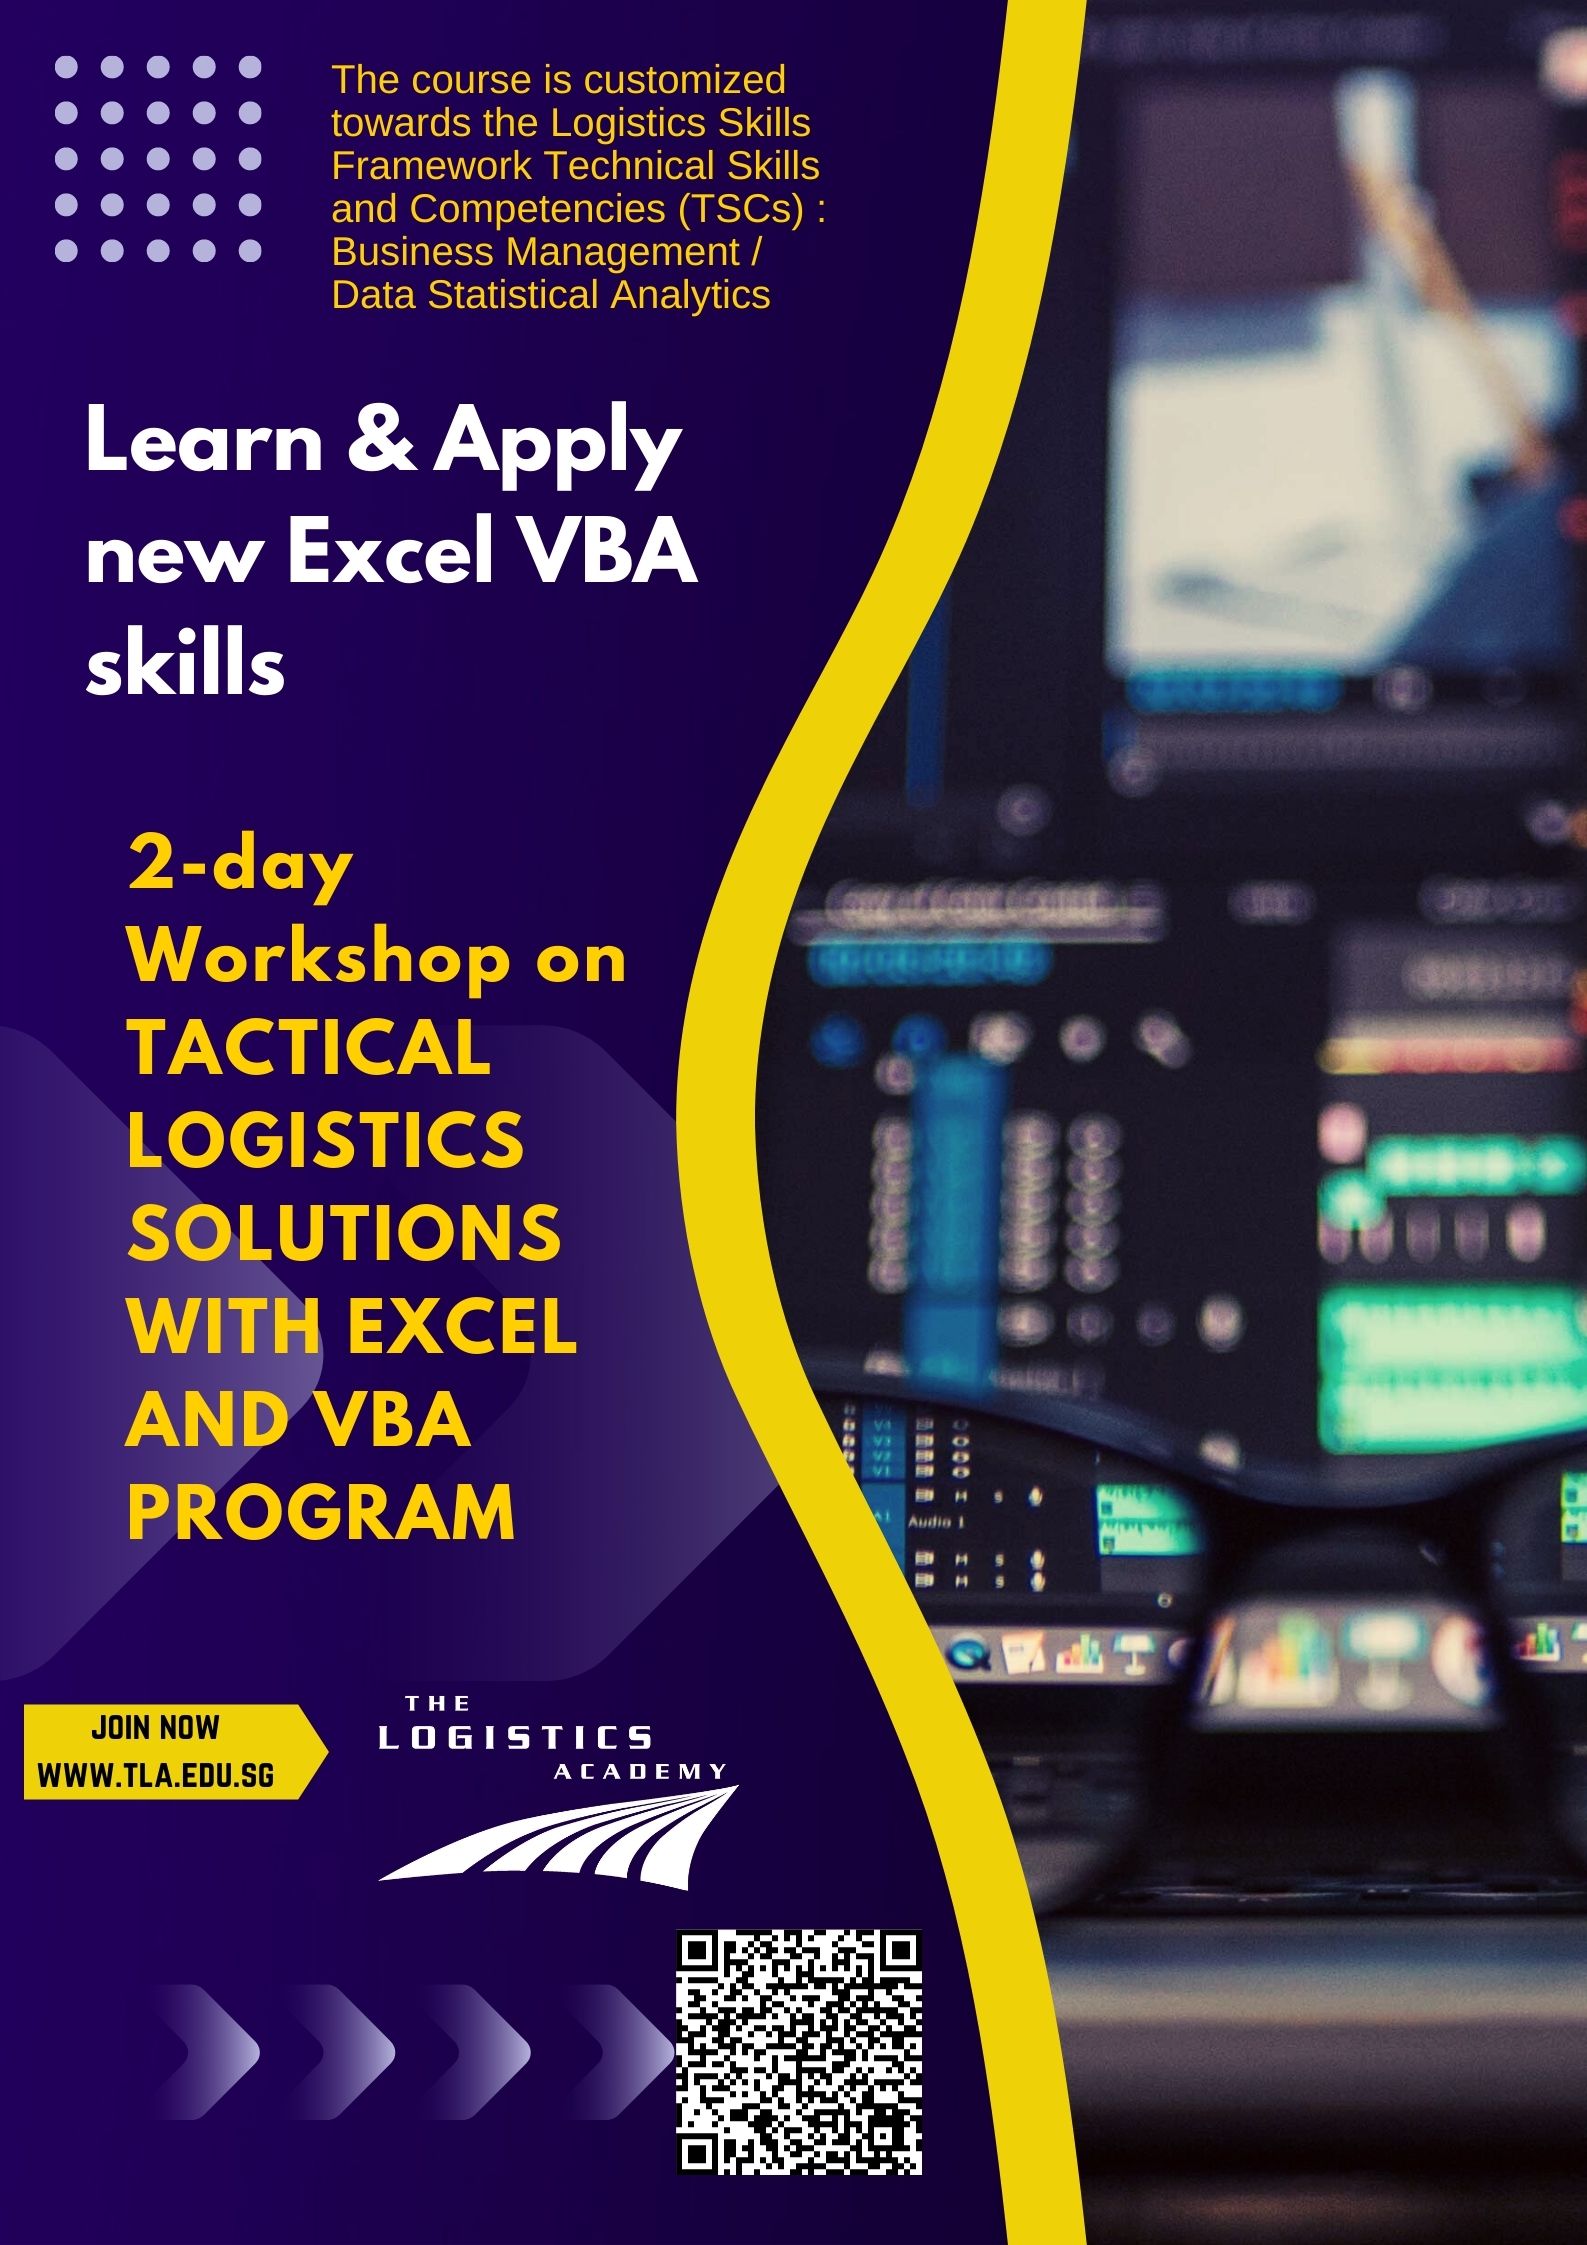 Tactical Logistics Solutions with Excel and VBA program… SFC eligible